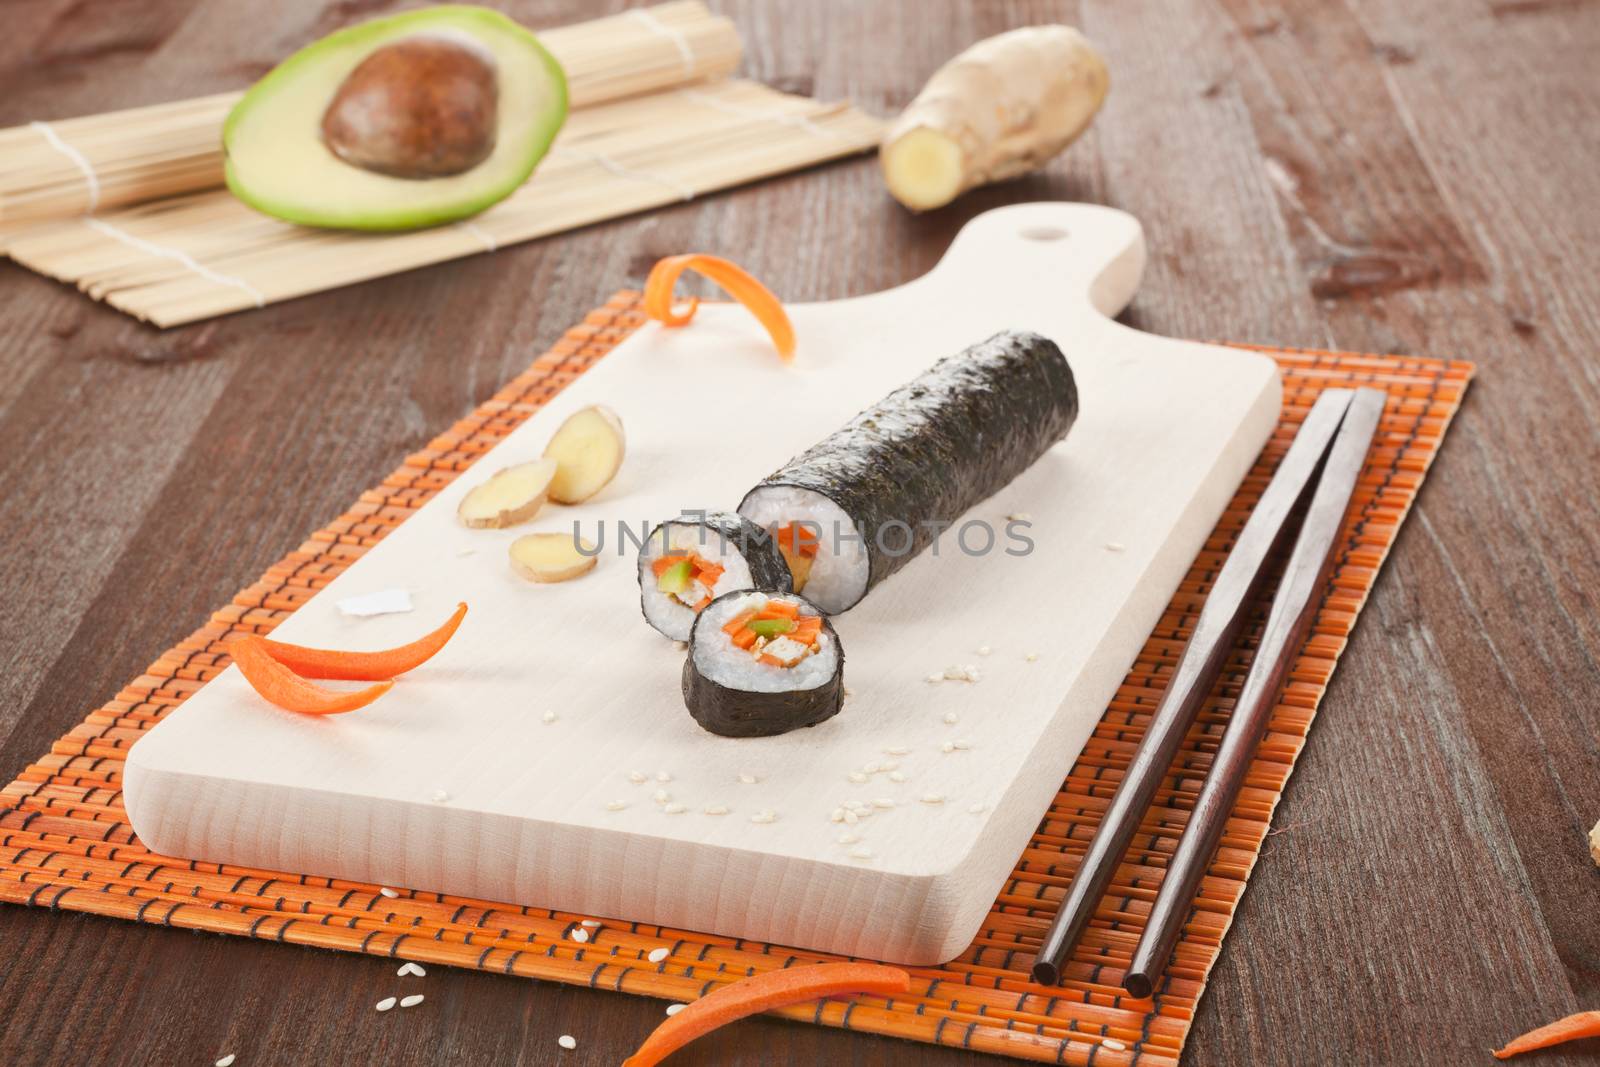 Delicious sushi roll on cutting board with bamboo mat, chopsticks, avocado and ginger.